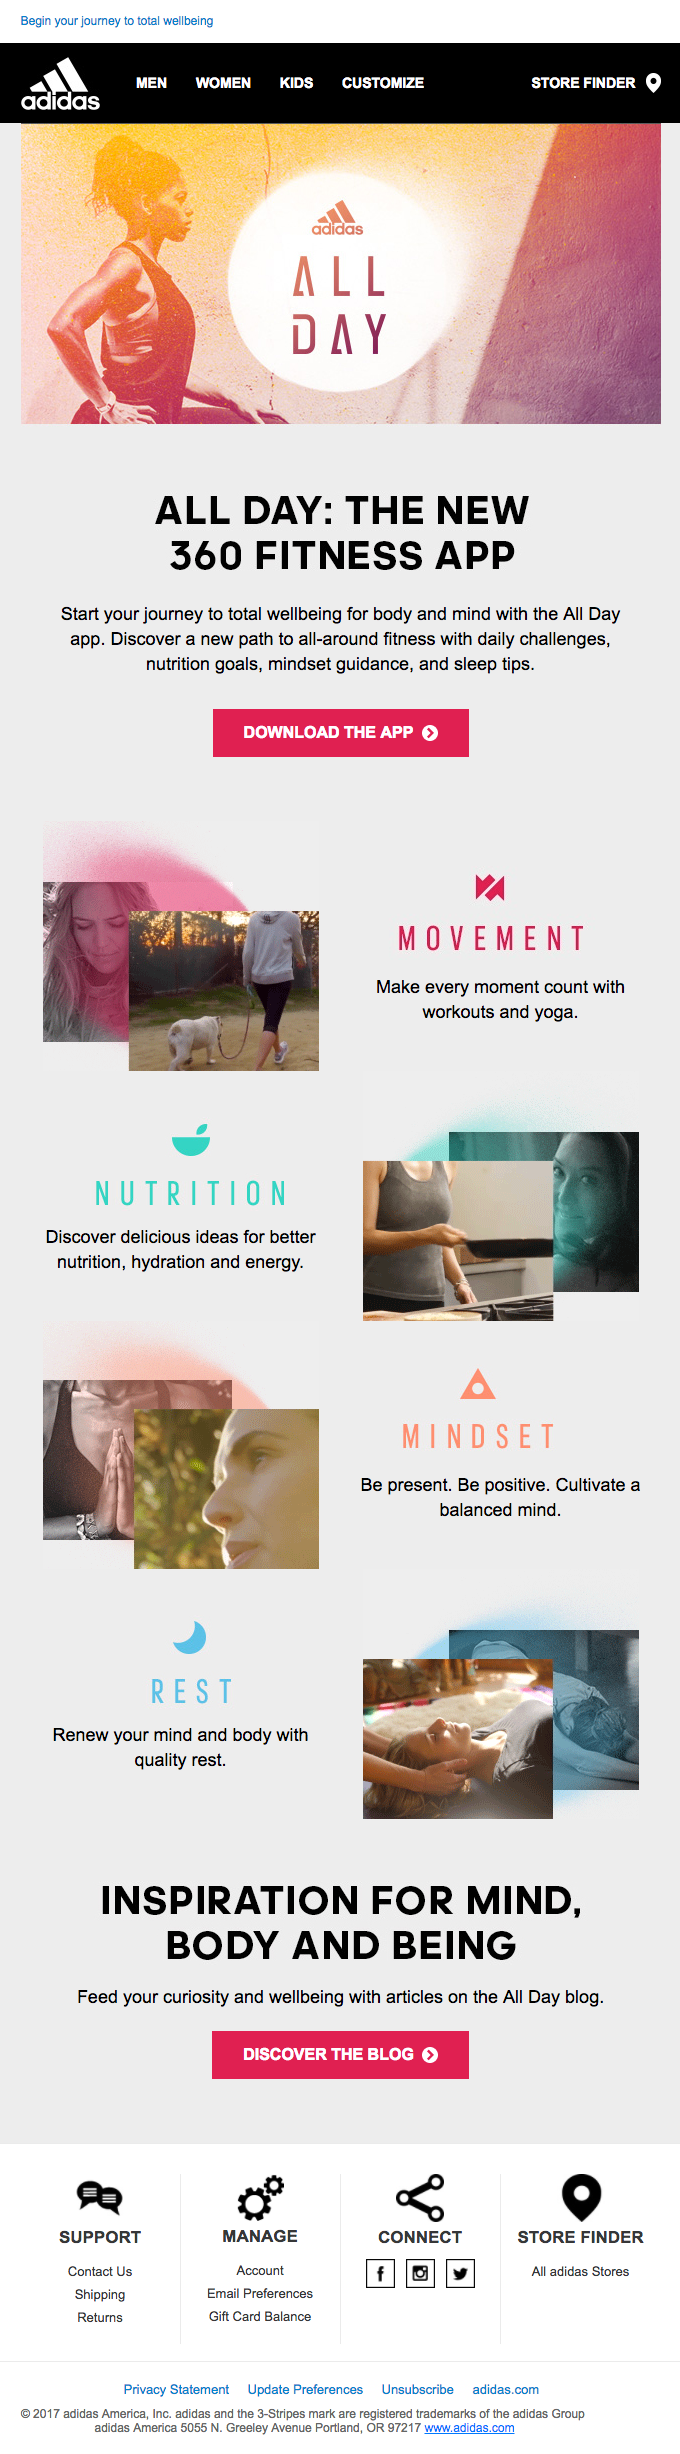 All Day: The New 360 Fitness App - Adidas Email Newsletter